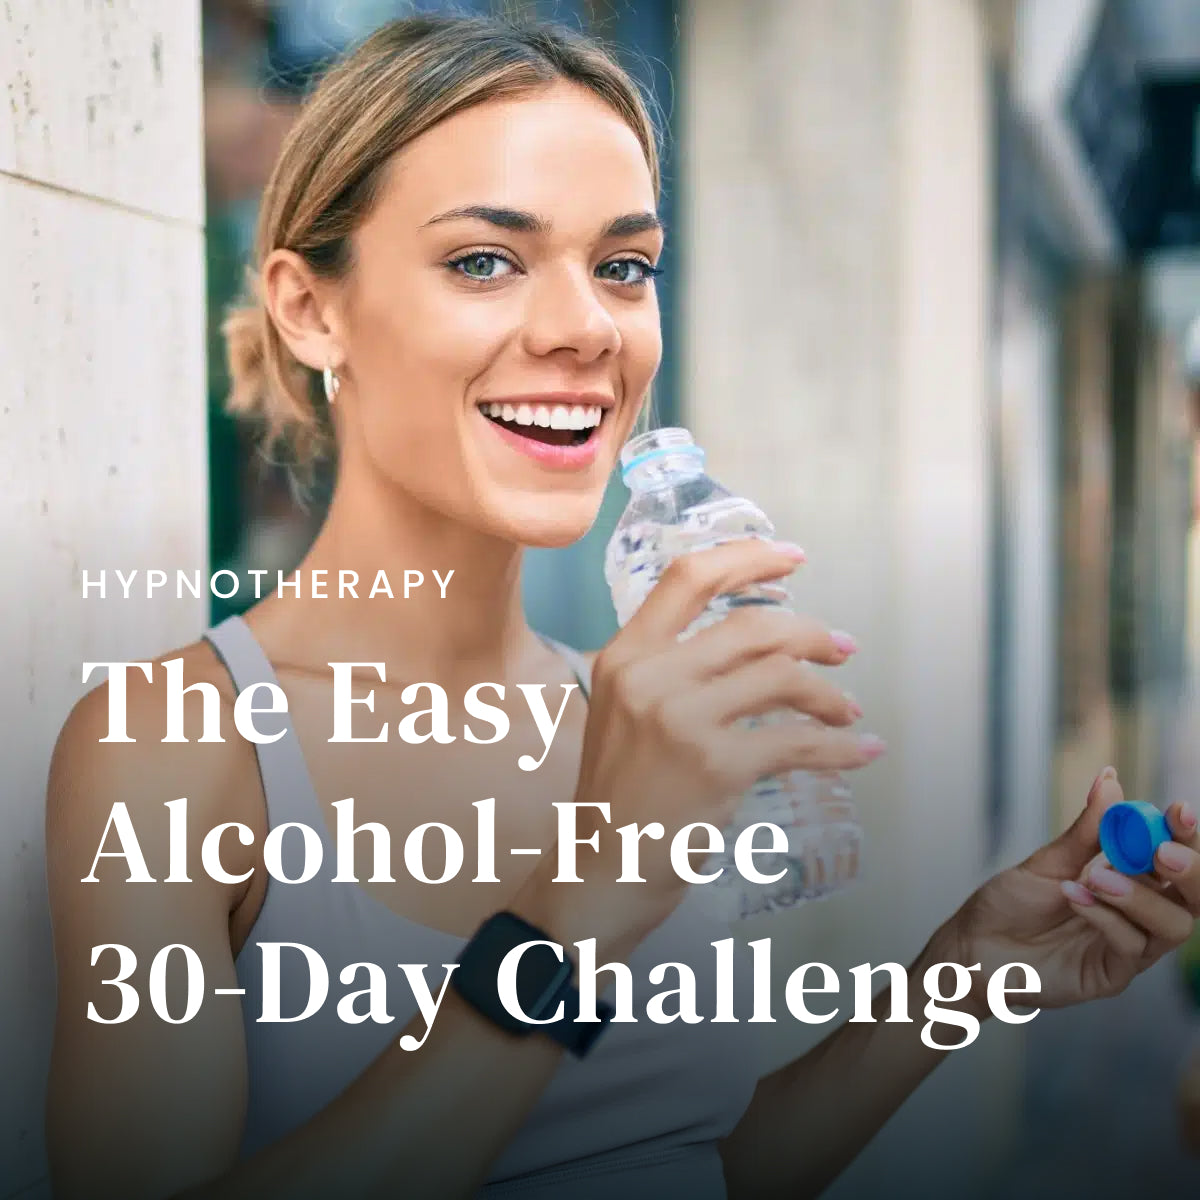 The Easy Alcohol-Free 30-Day Challenge